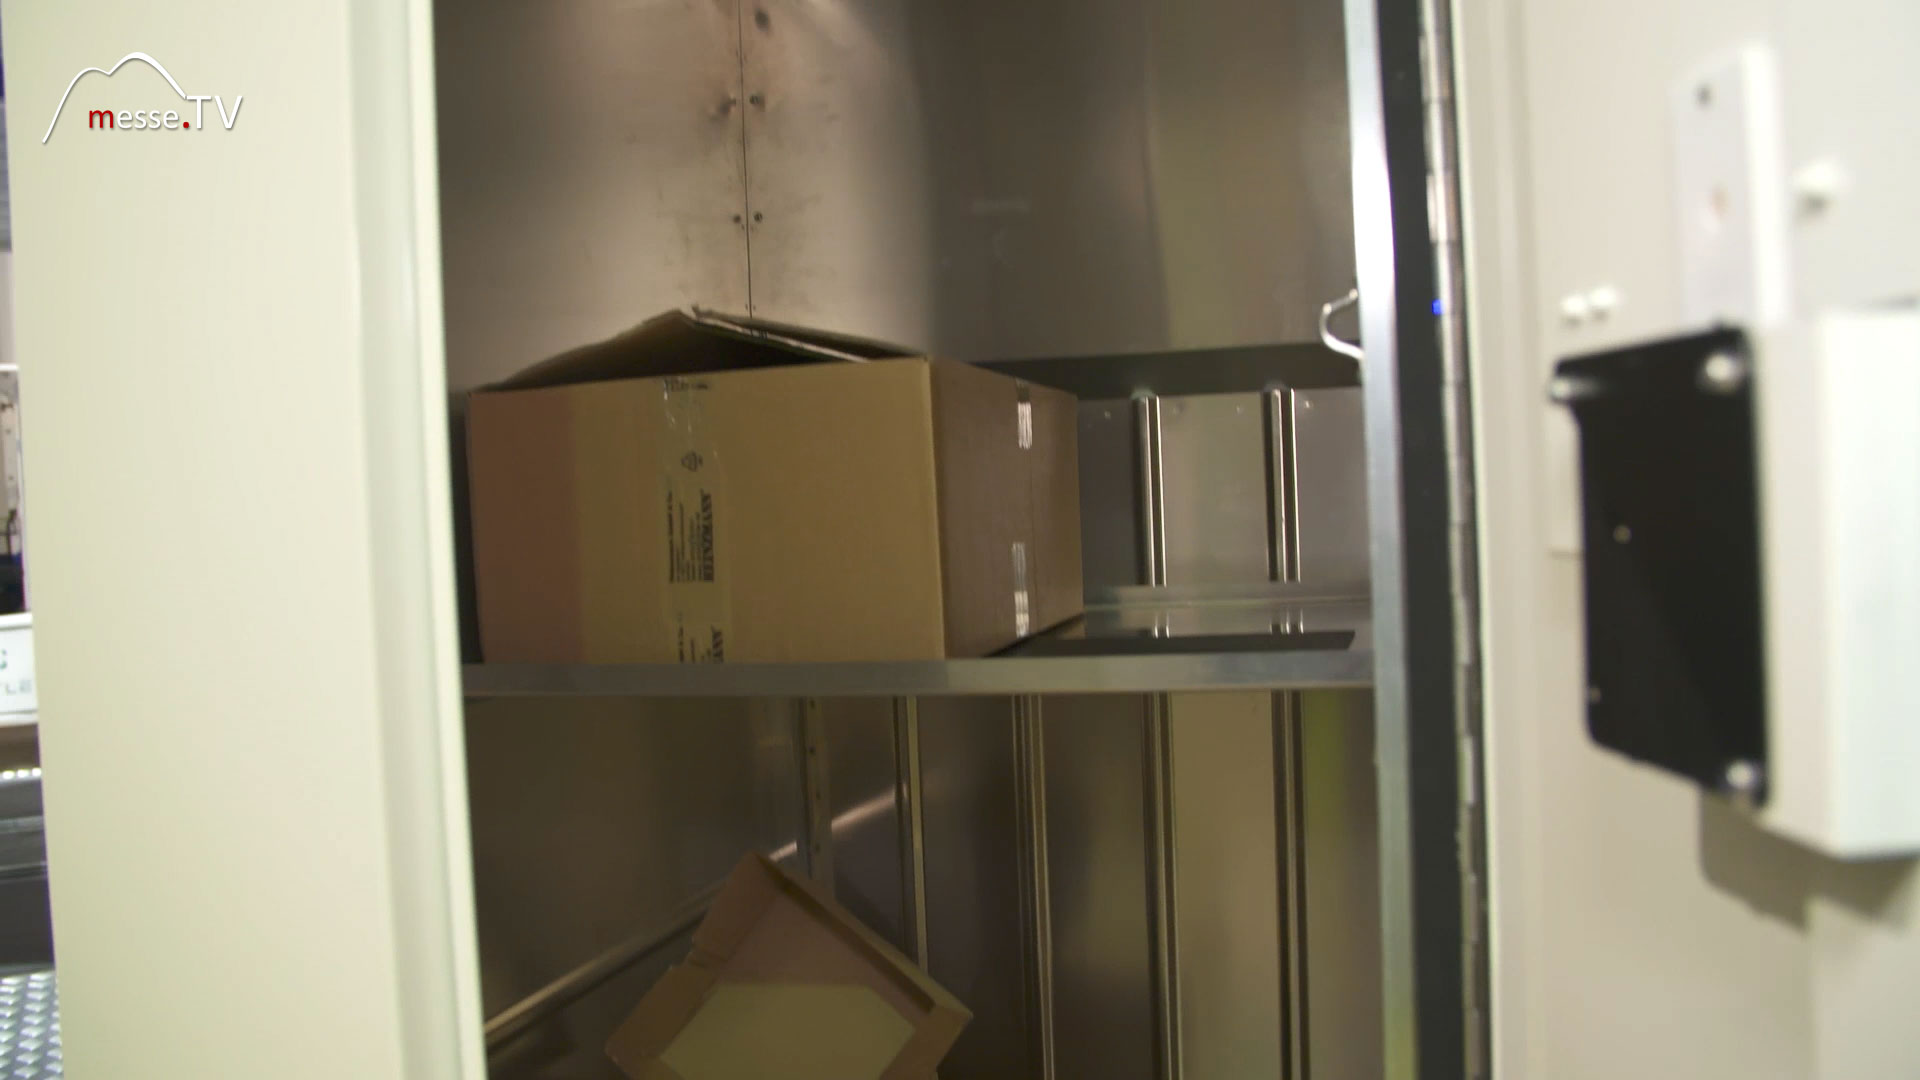 RYTLE Box delivery inside view